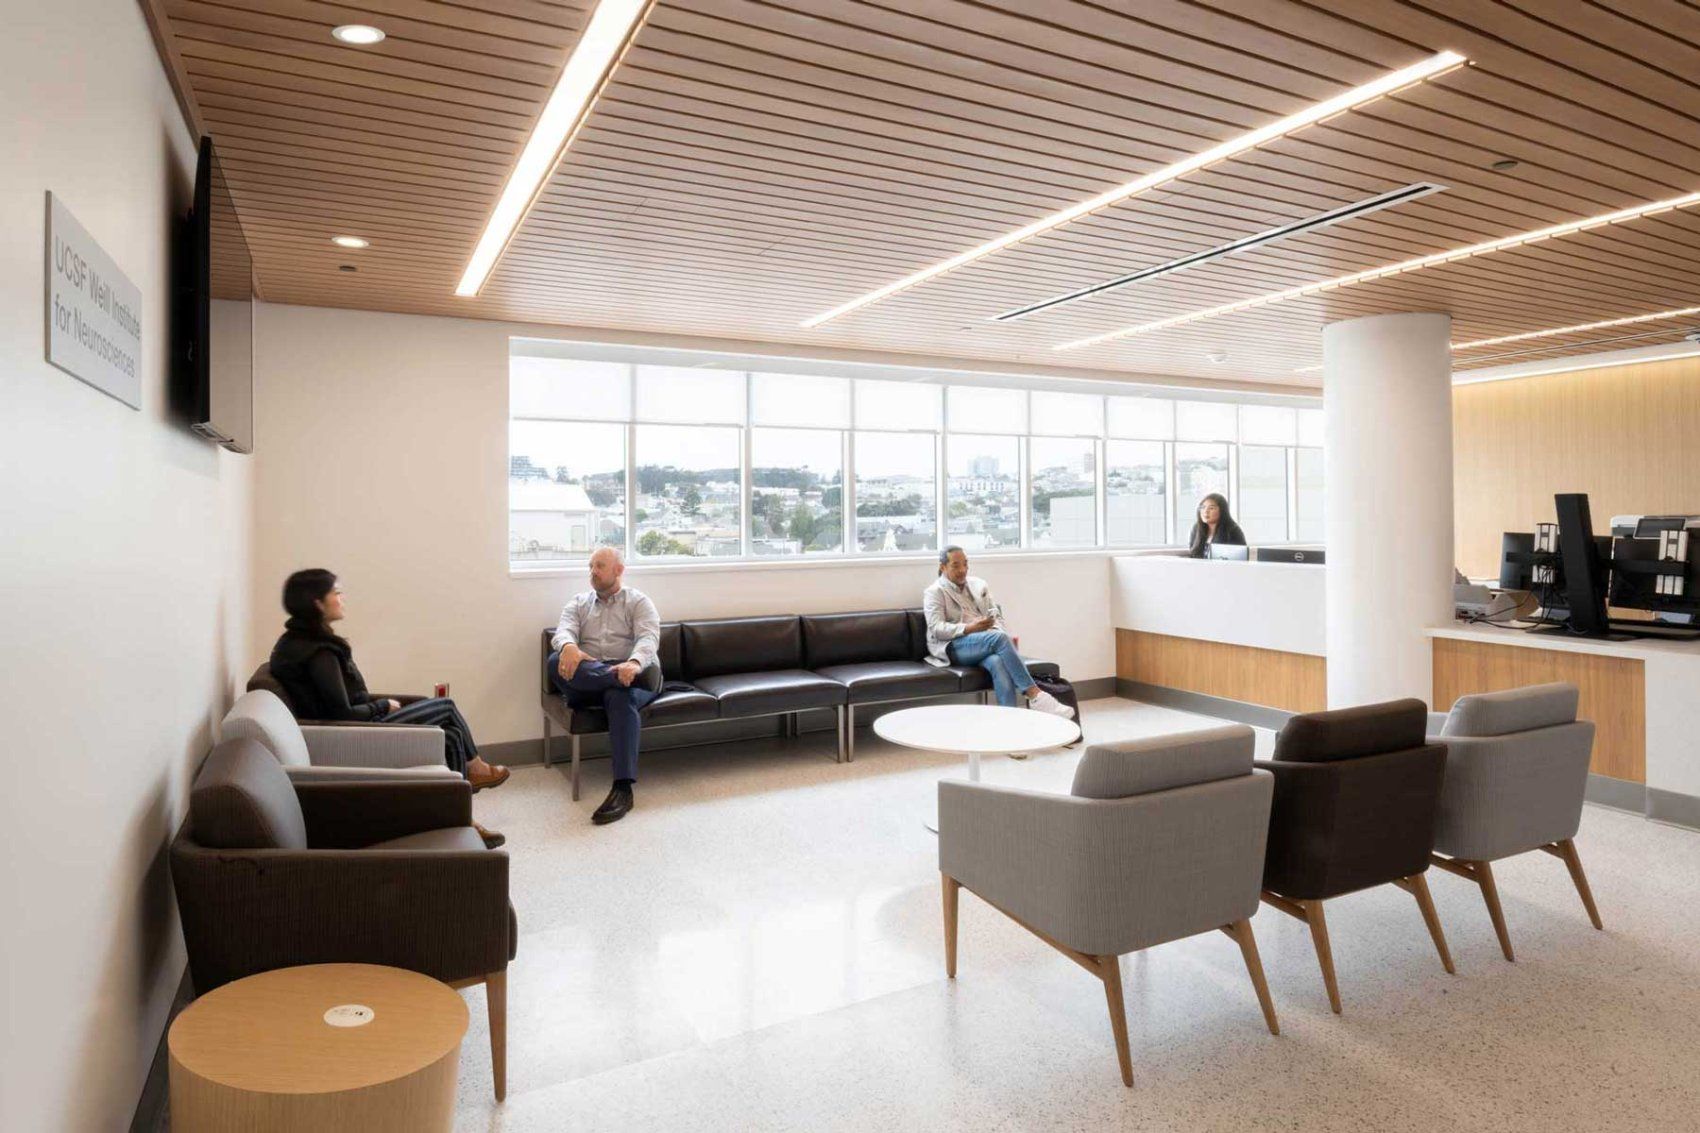 A comforting, light-filled reception area. A few people sit in modern grey and blue chairs.